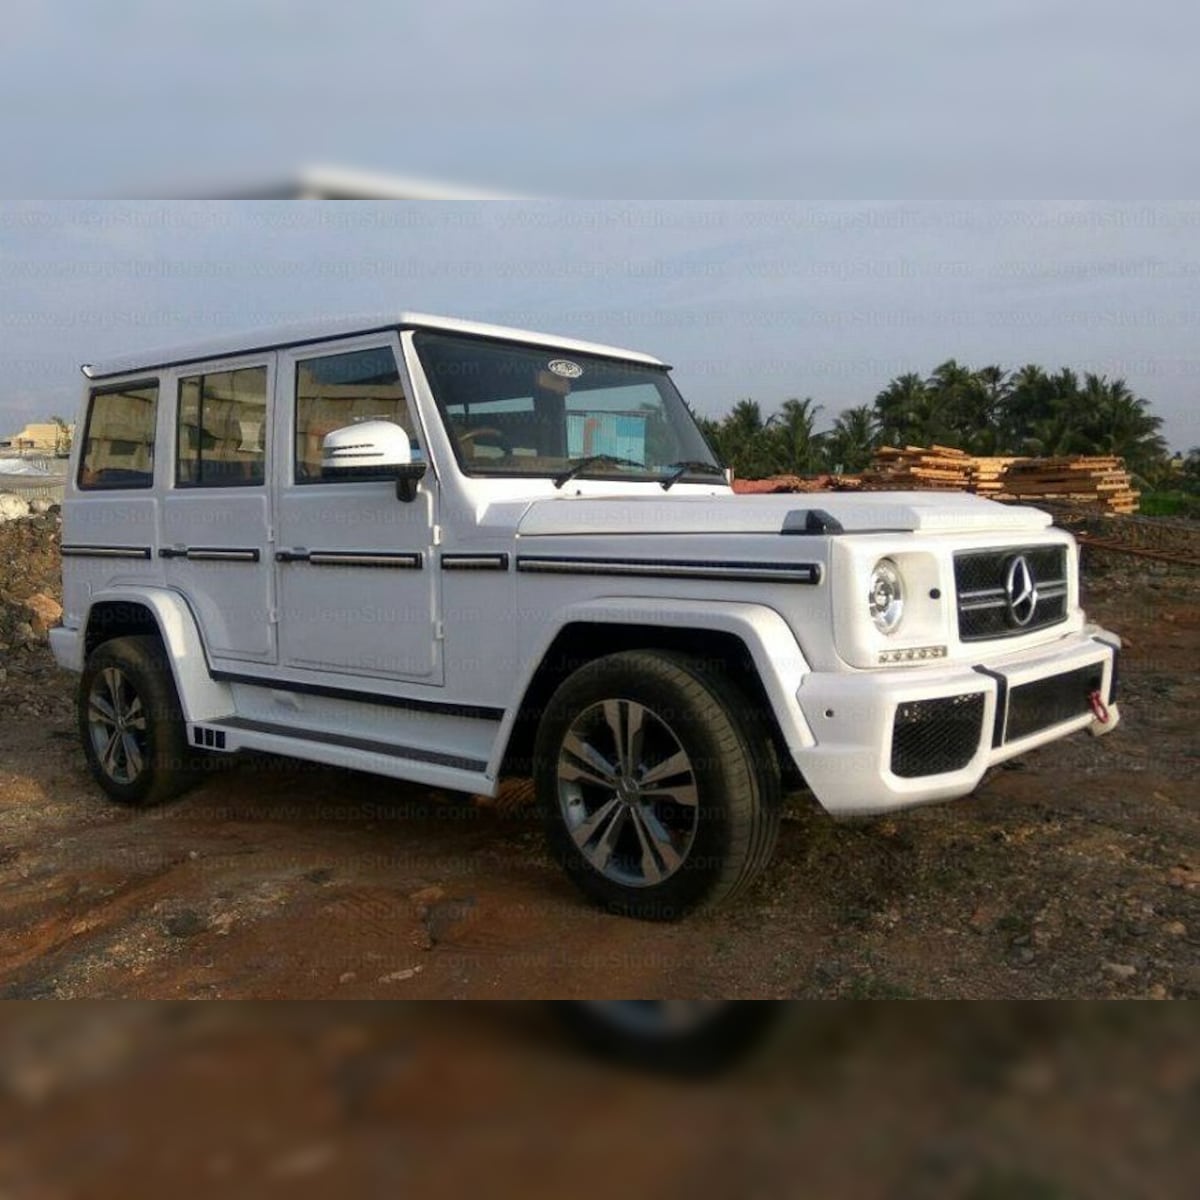 Convert Your Mahindra Bolero To Mercedes Benz G Wagen For Rs 7 35 Lakh